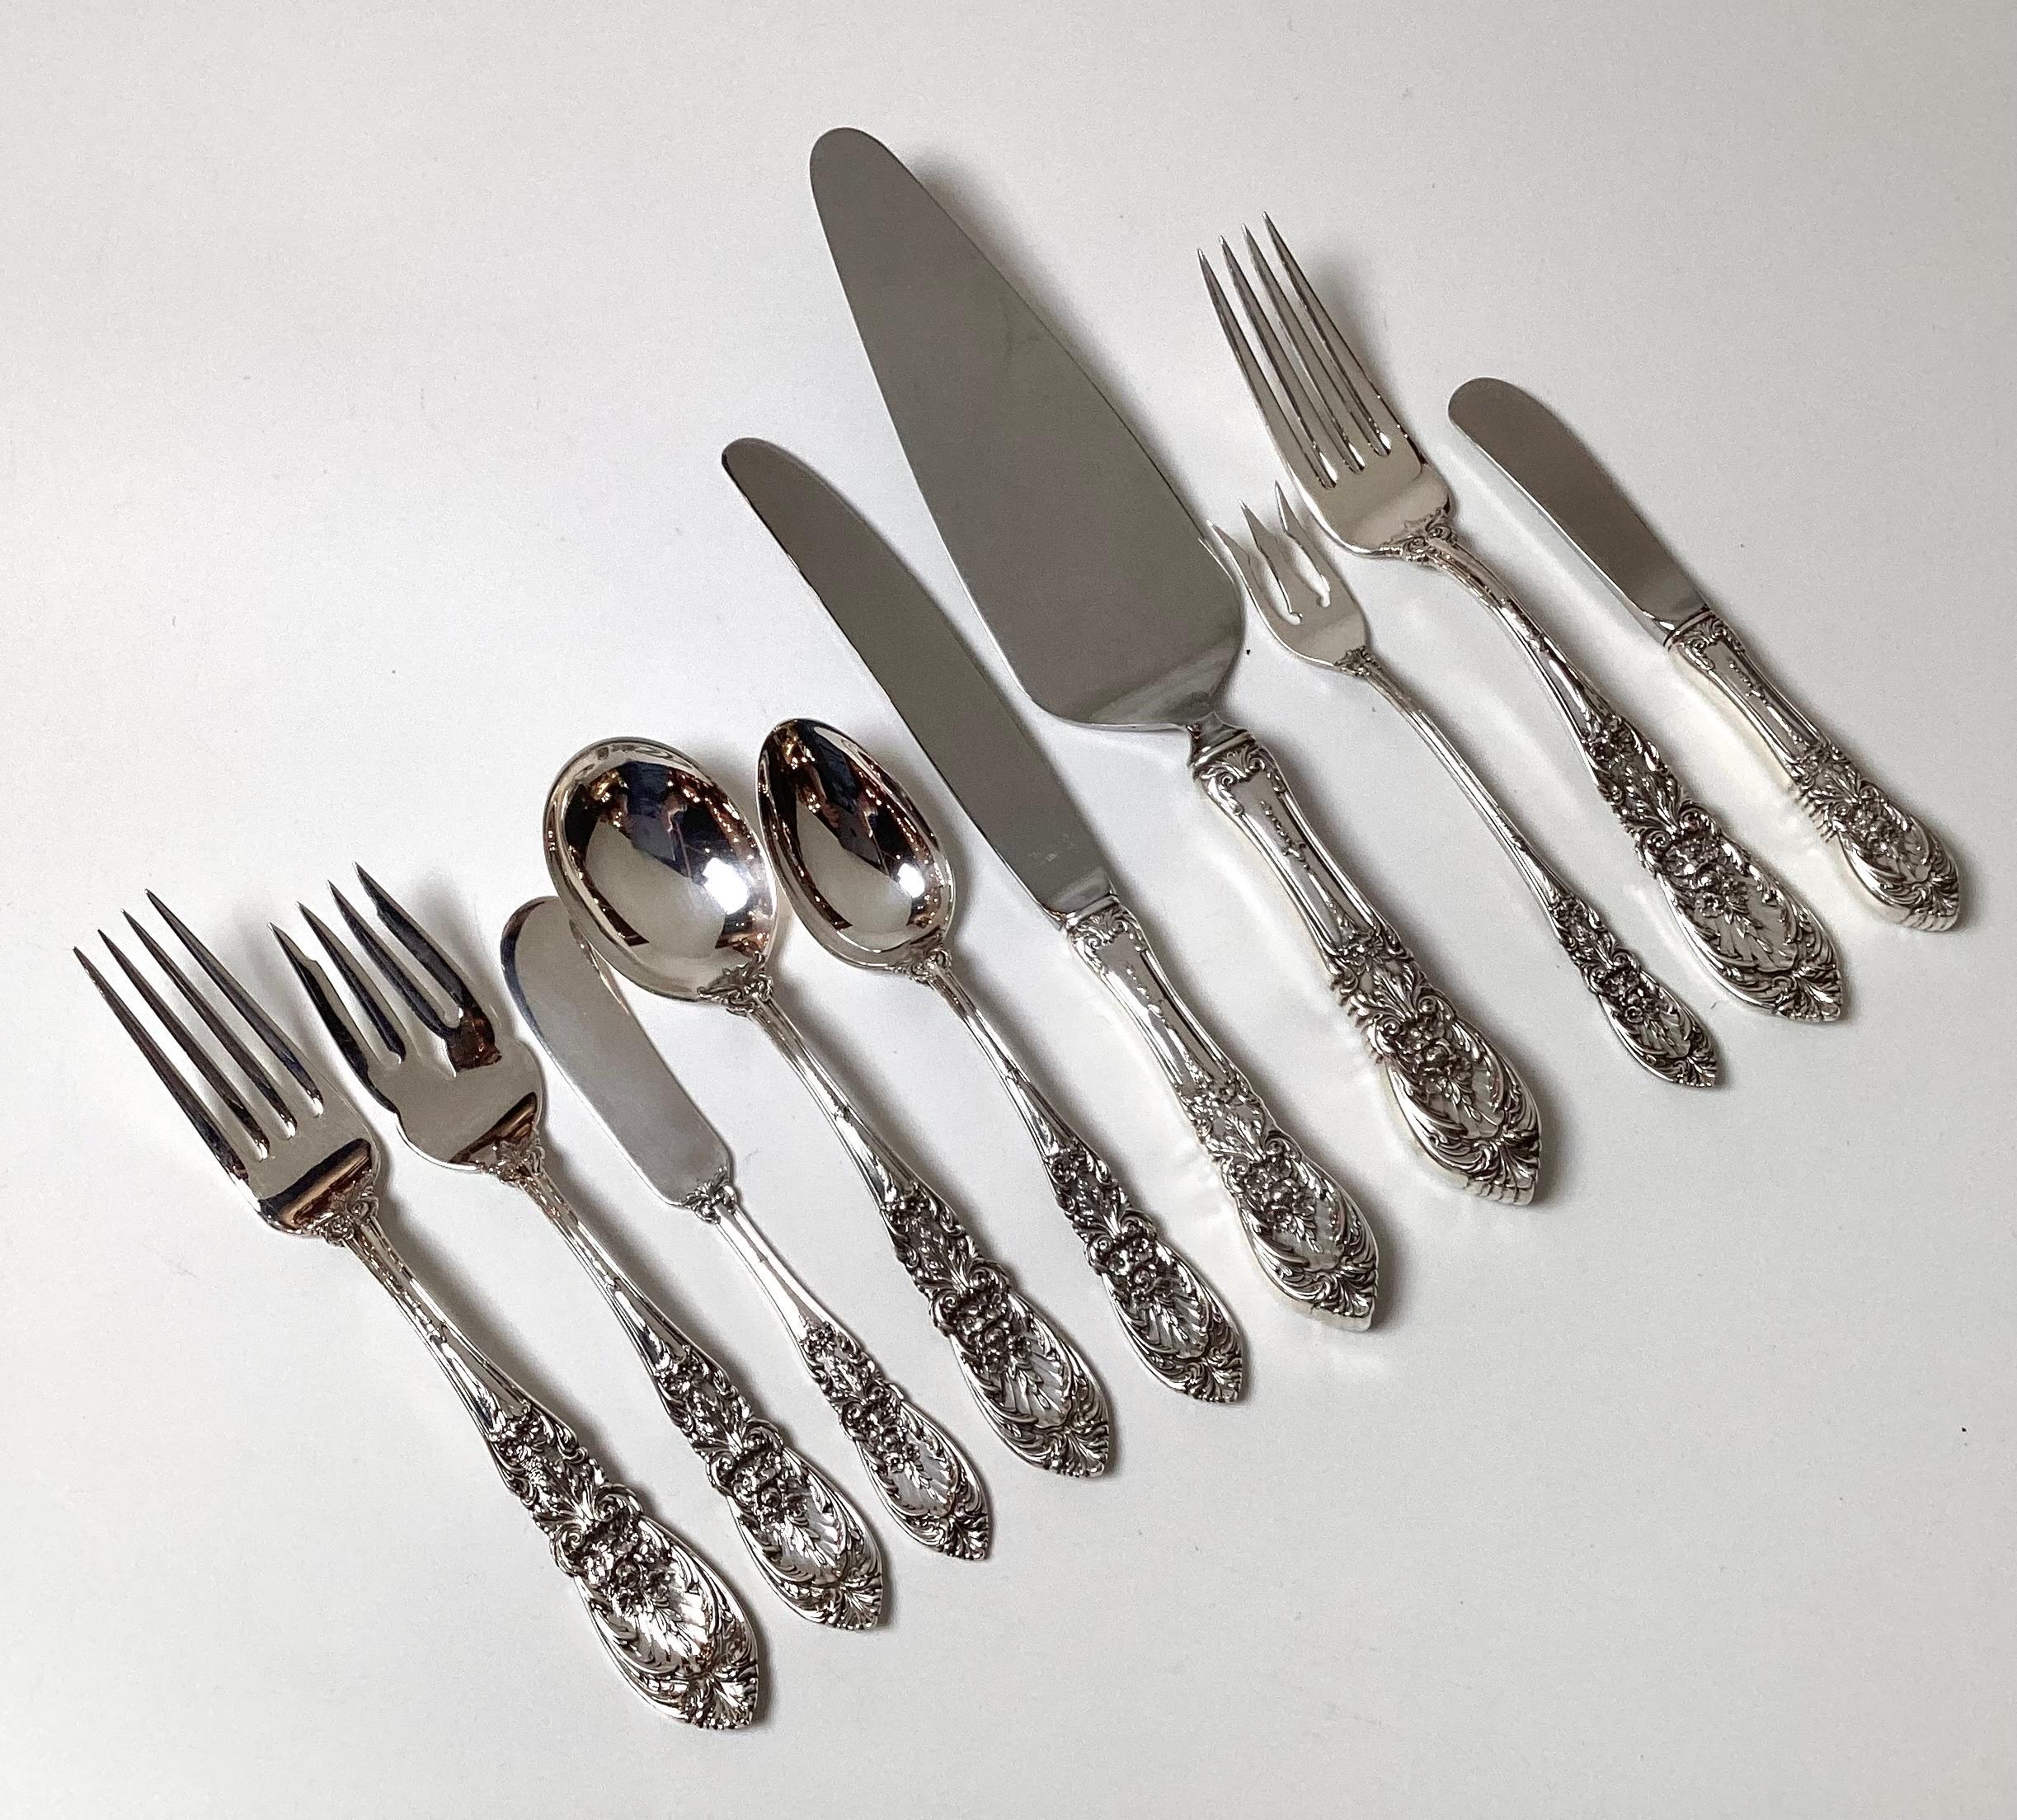 Sterling silver flatware set, service for 18, Richelieu pattern by International sterling, 110 pieces in total. The elegantly detailed set consists of 19 knives, 20 butter knives, 19 salad forks, 19 dinner forks, 12 soup spoons, 19 tea spoons, I